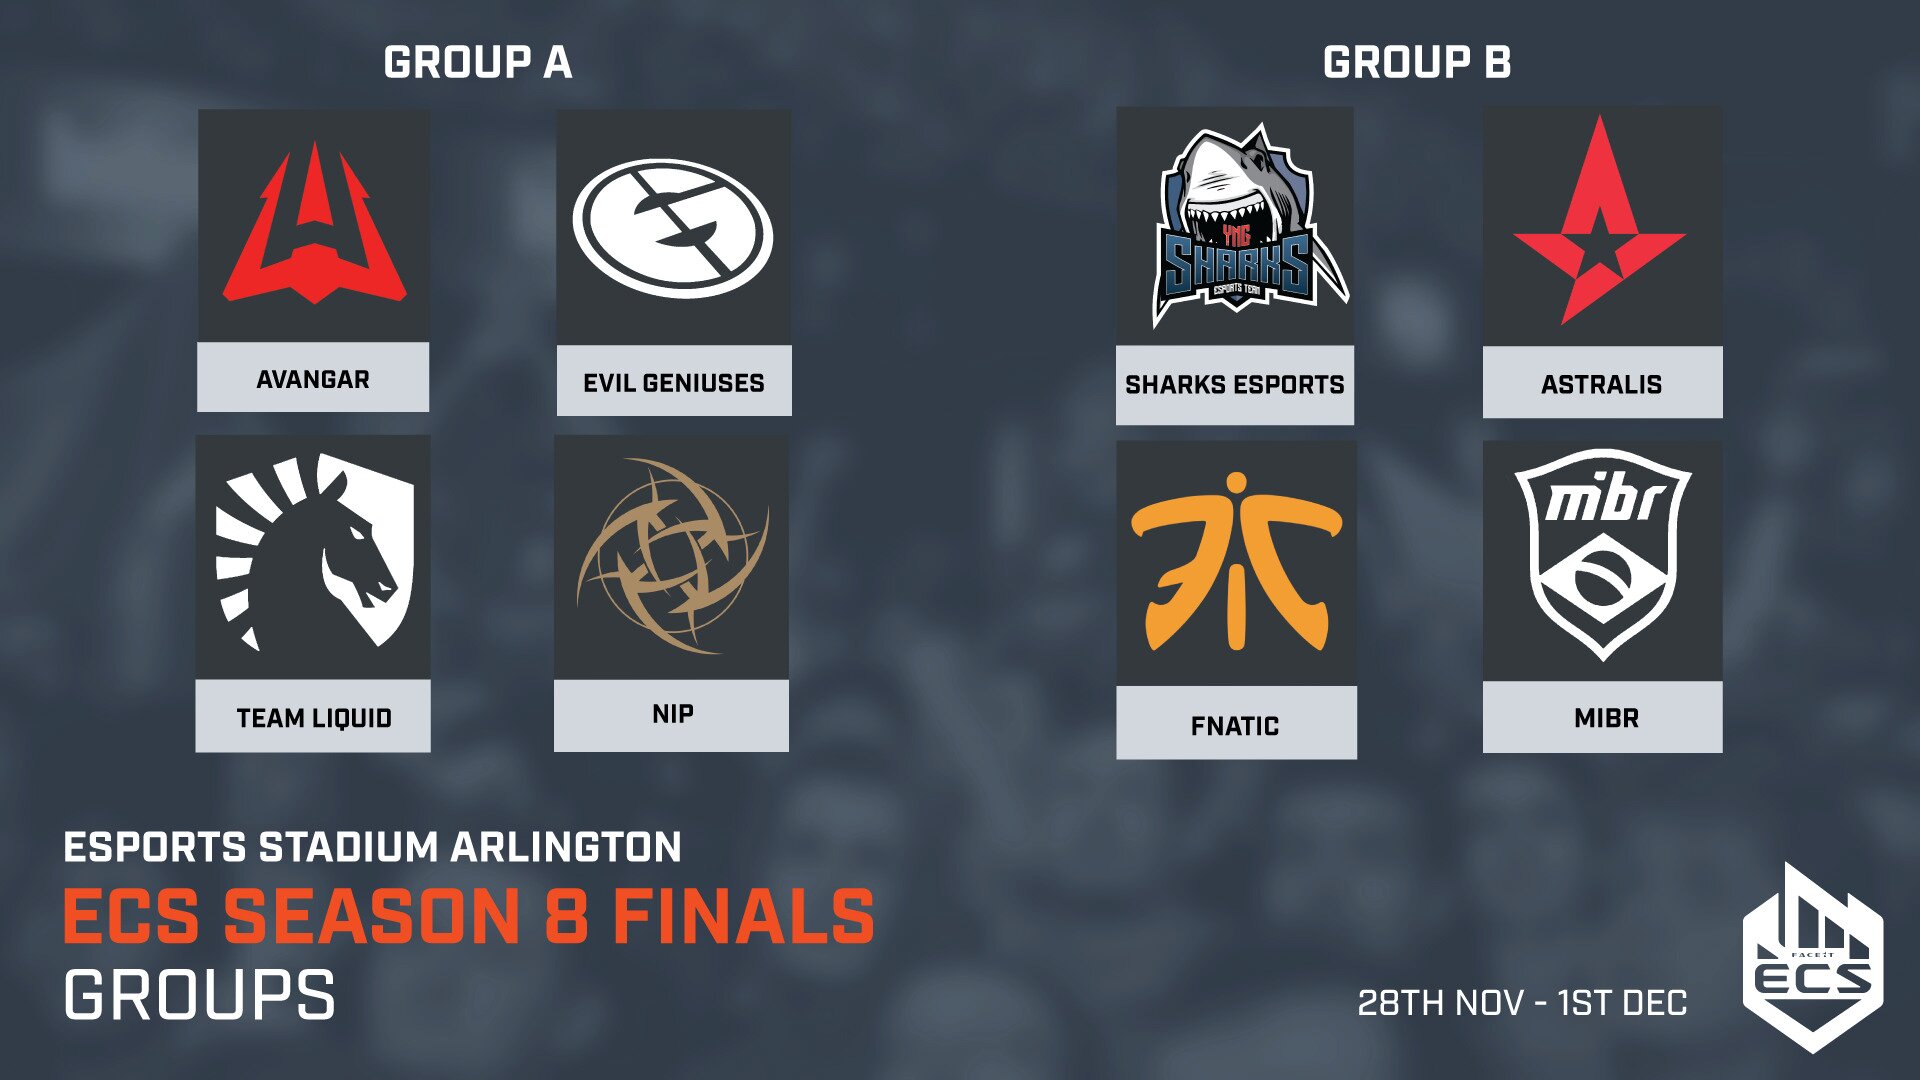 AVANGAR and Sharks Esports Team enter the Finals at No.1 seeds in their groups (Image via ECS)